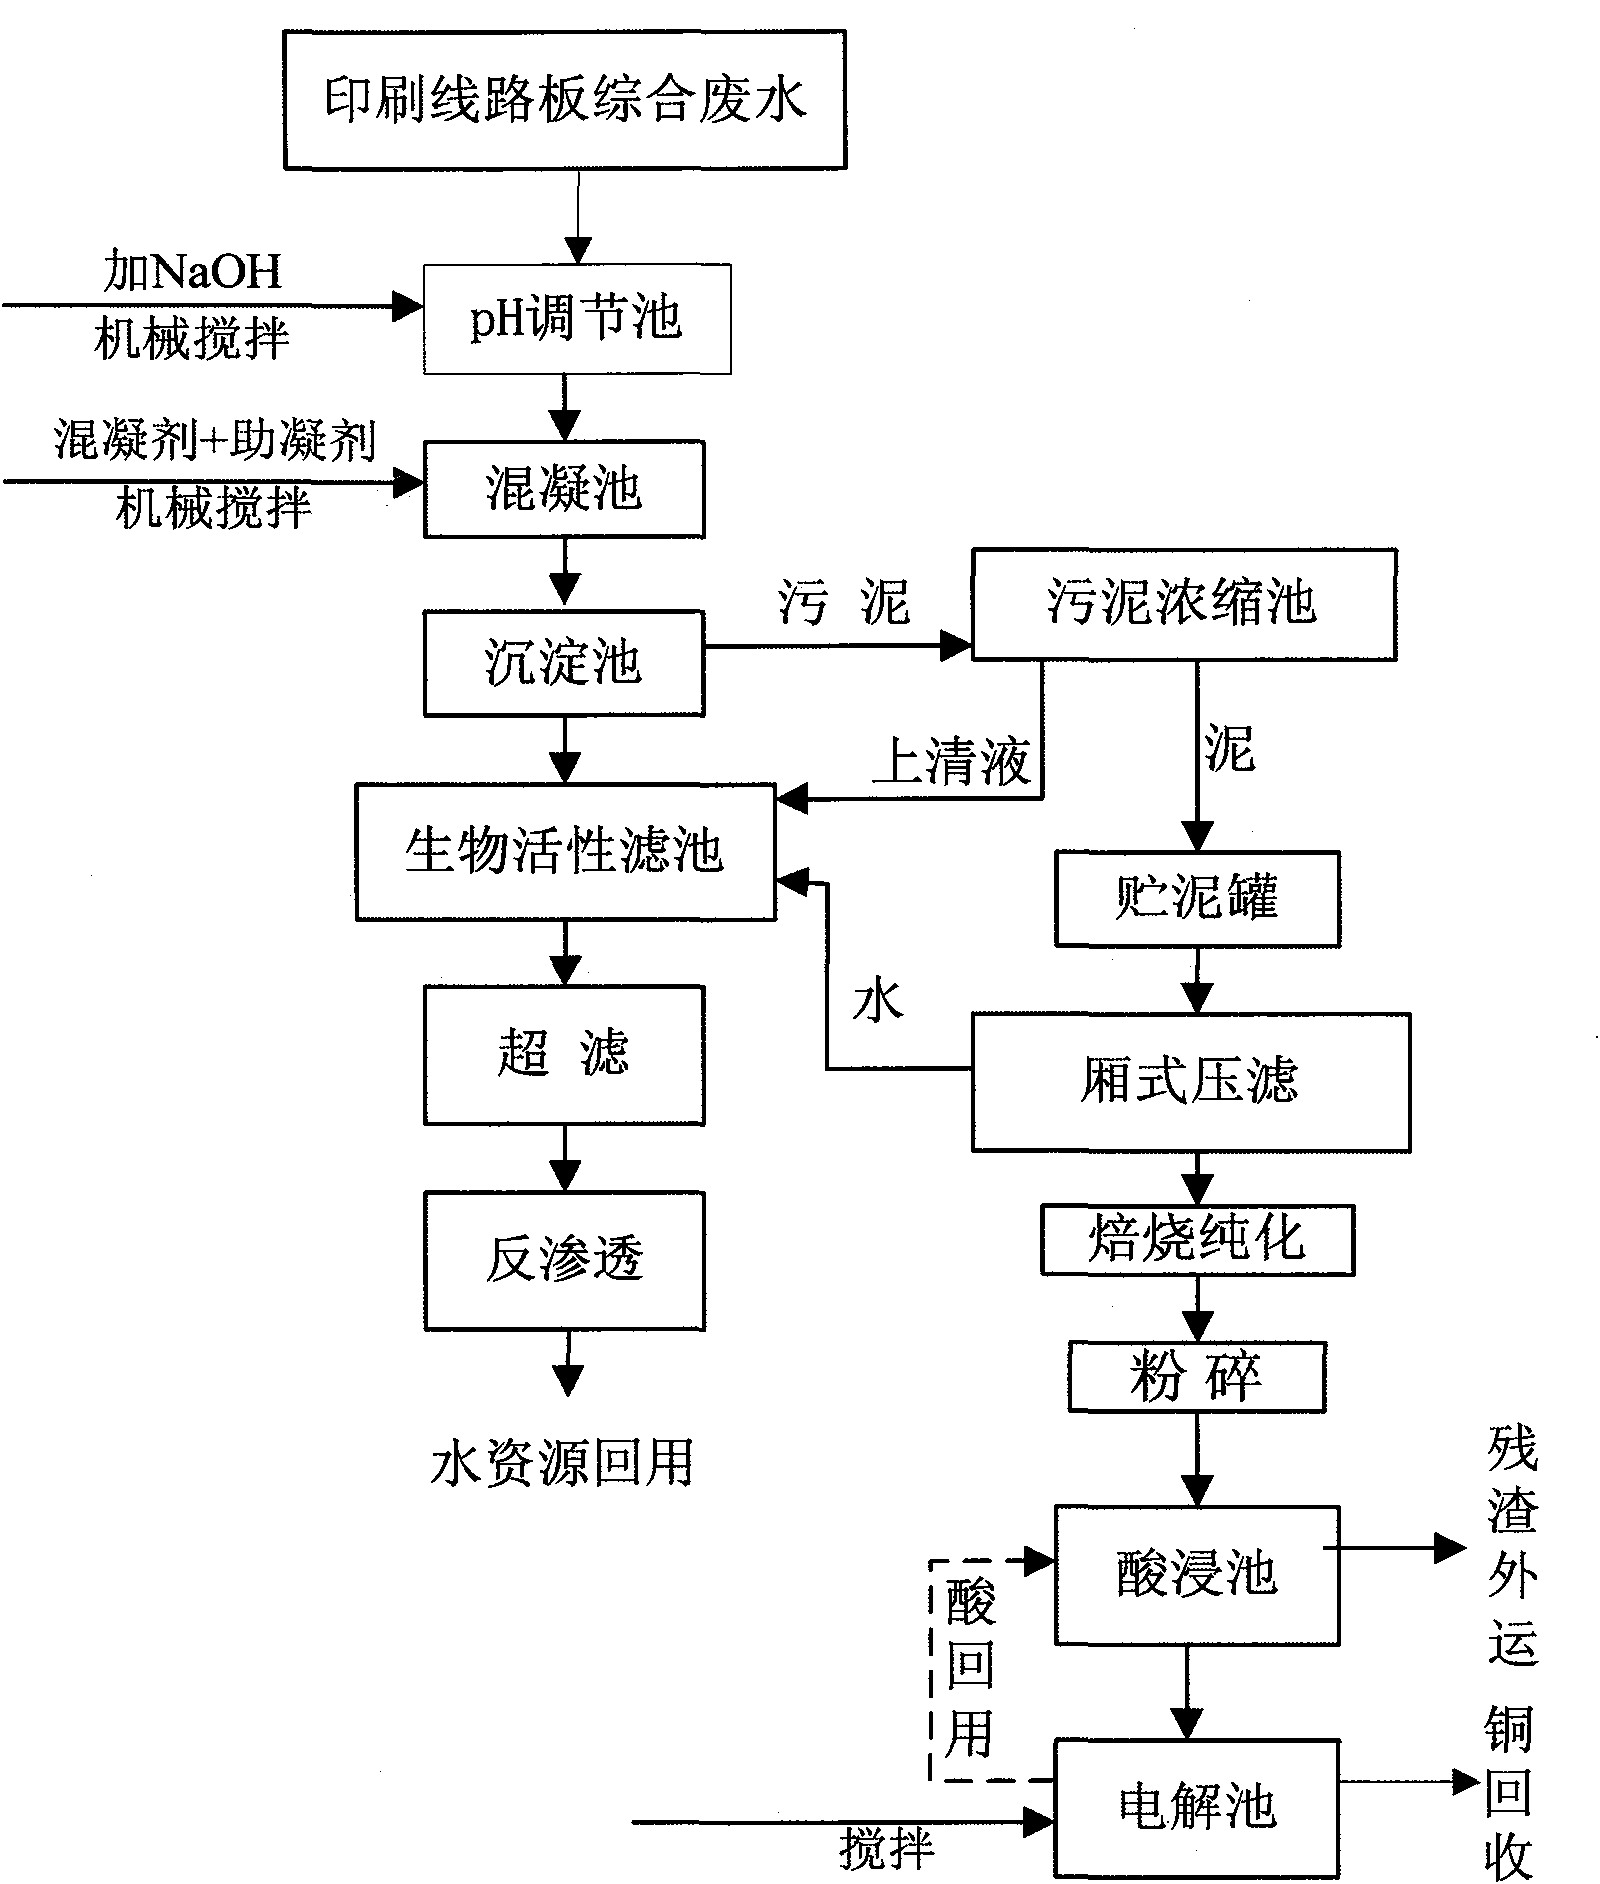 Printed circuit board integrated wastewater resource utilization method